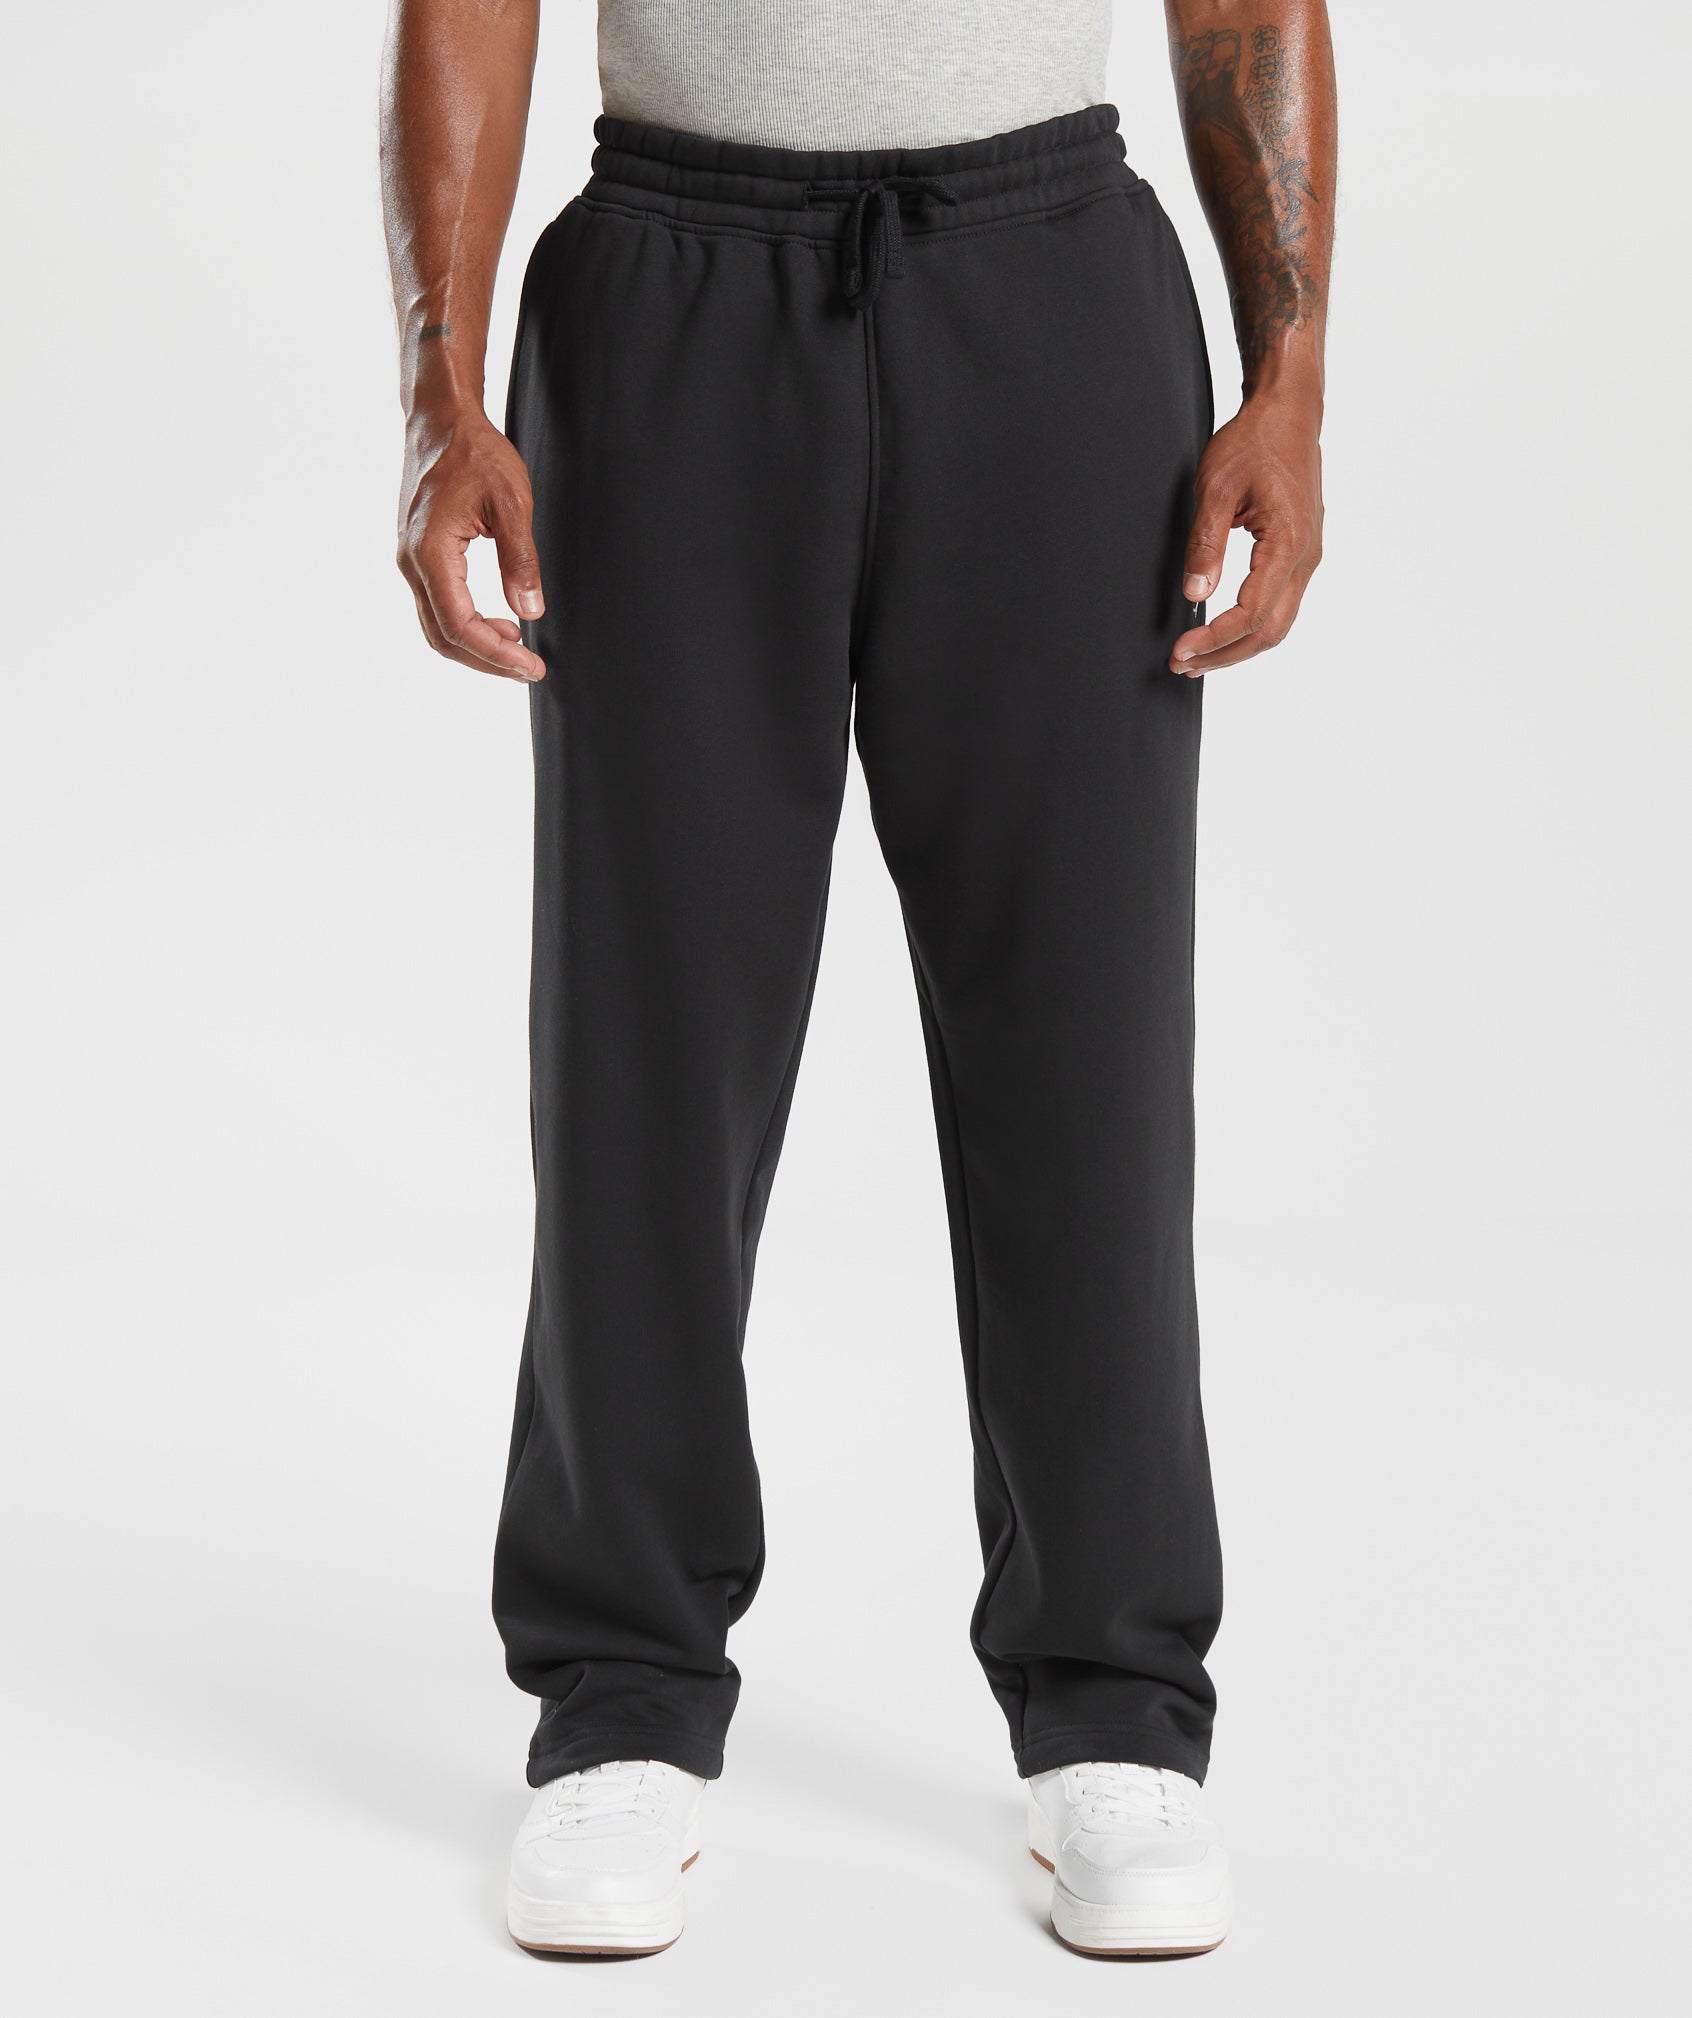 Best Track Pants and Joggers for Men | Nykaa Fashion's Style Files